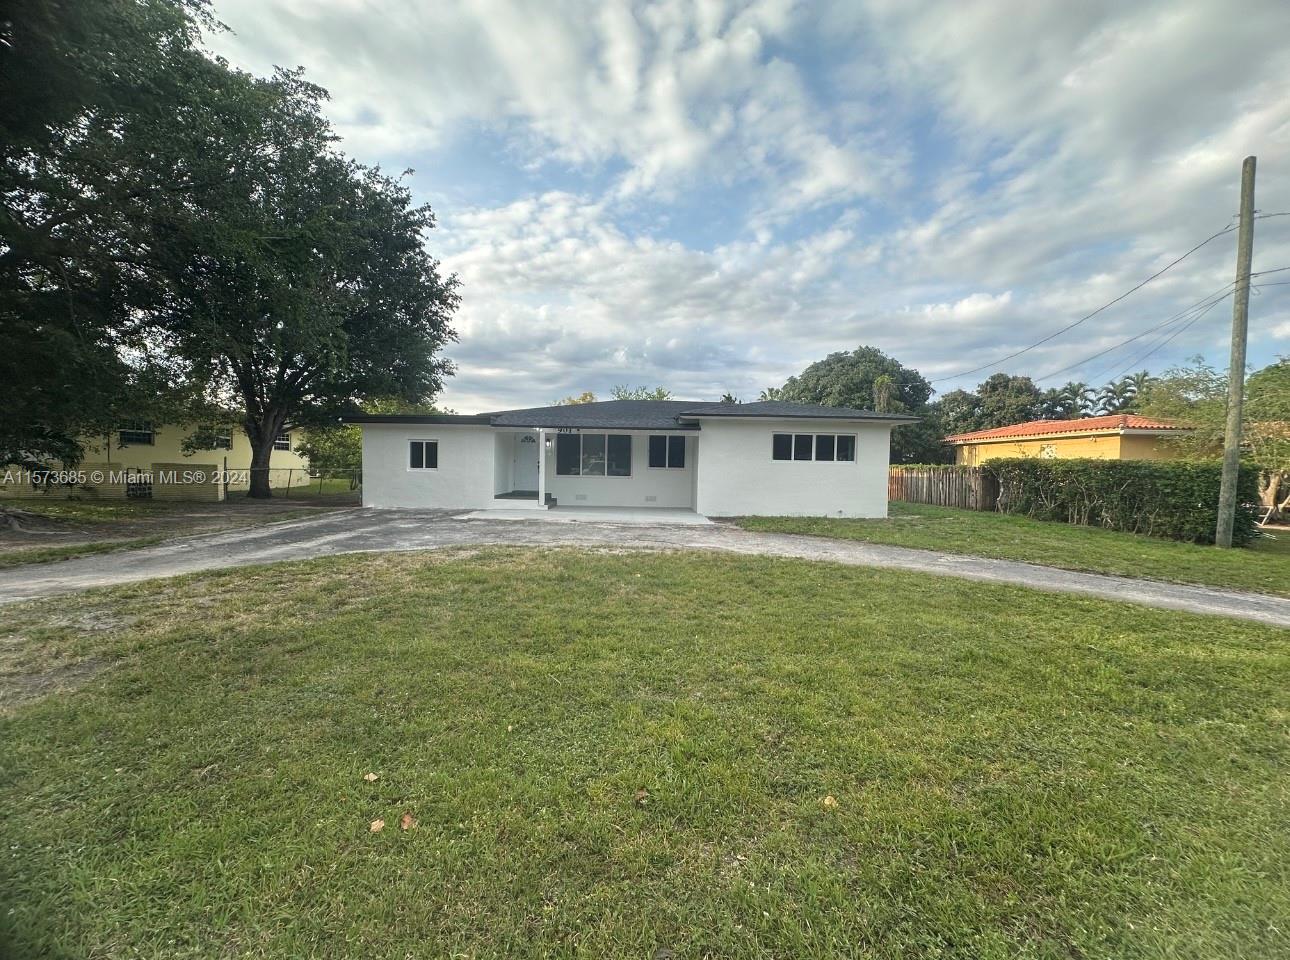 901 Nw 153rd St St, Miami, Broward County, Florida - 4 Bedrooms  
2 Bathrooms - 